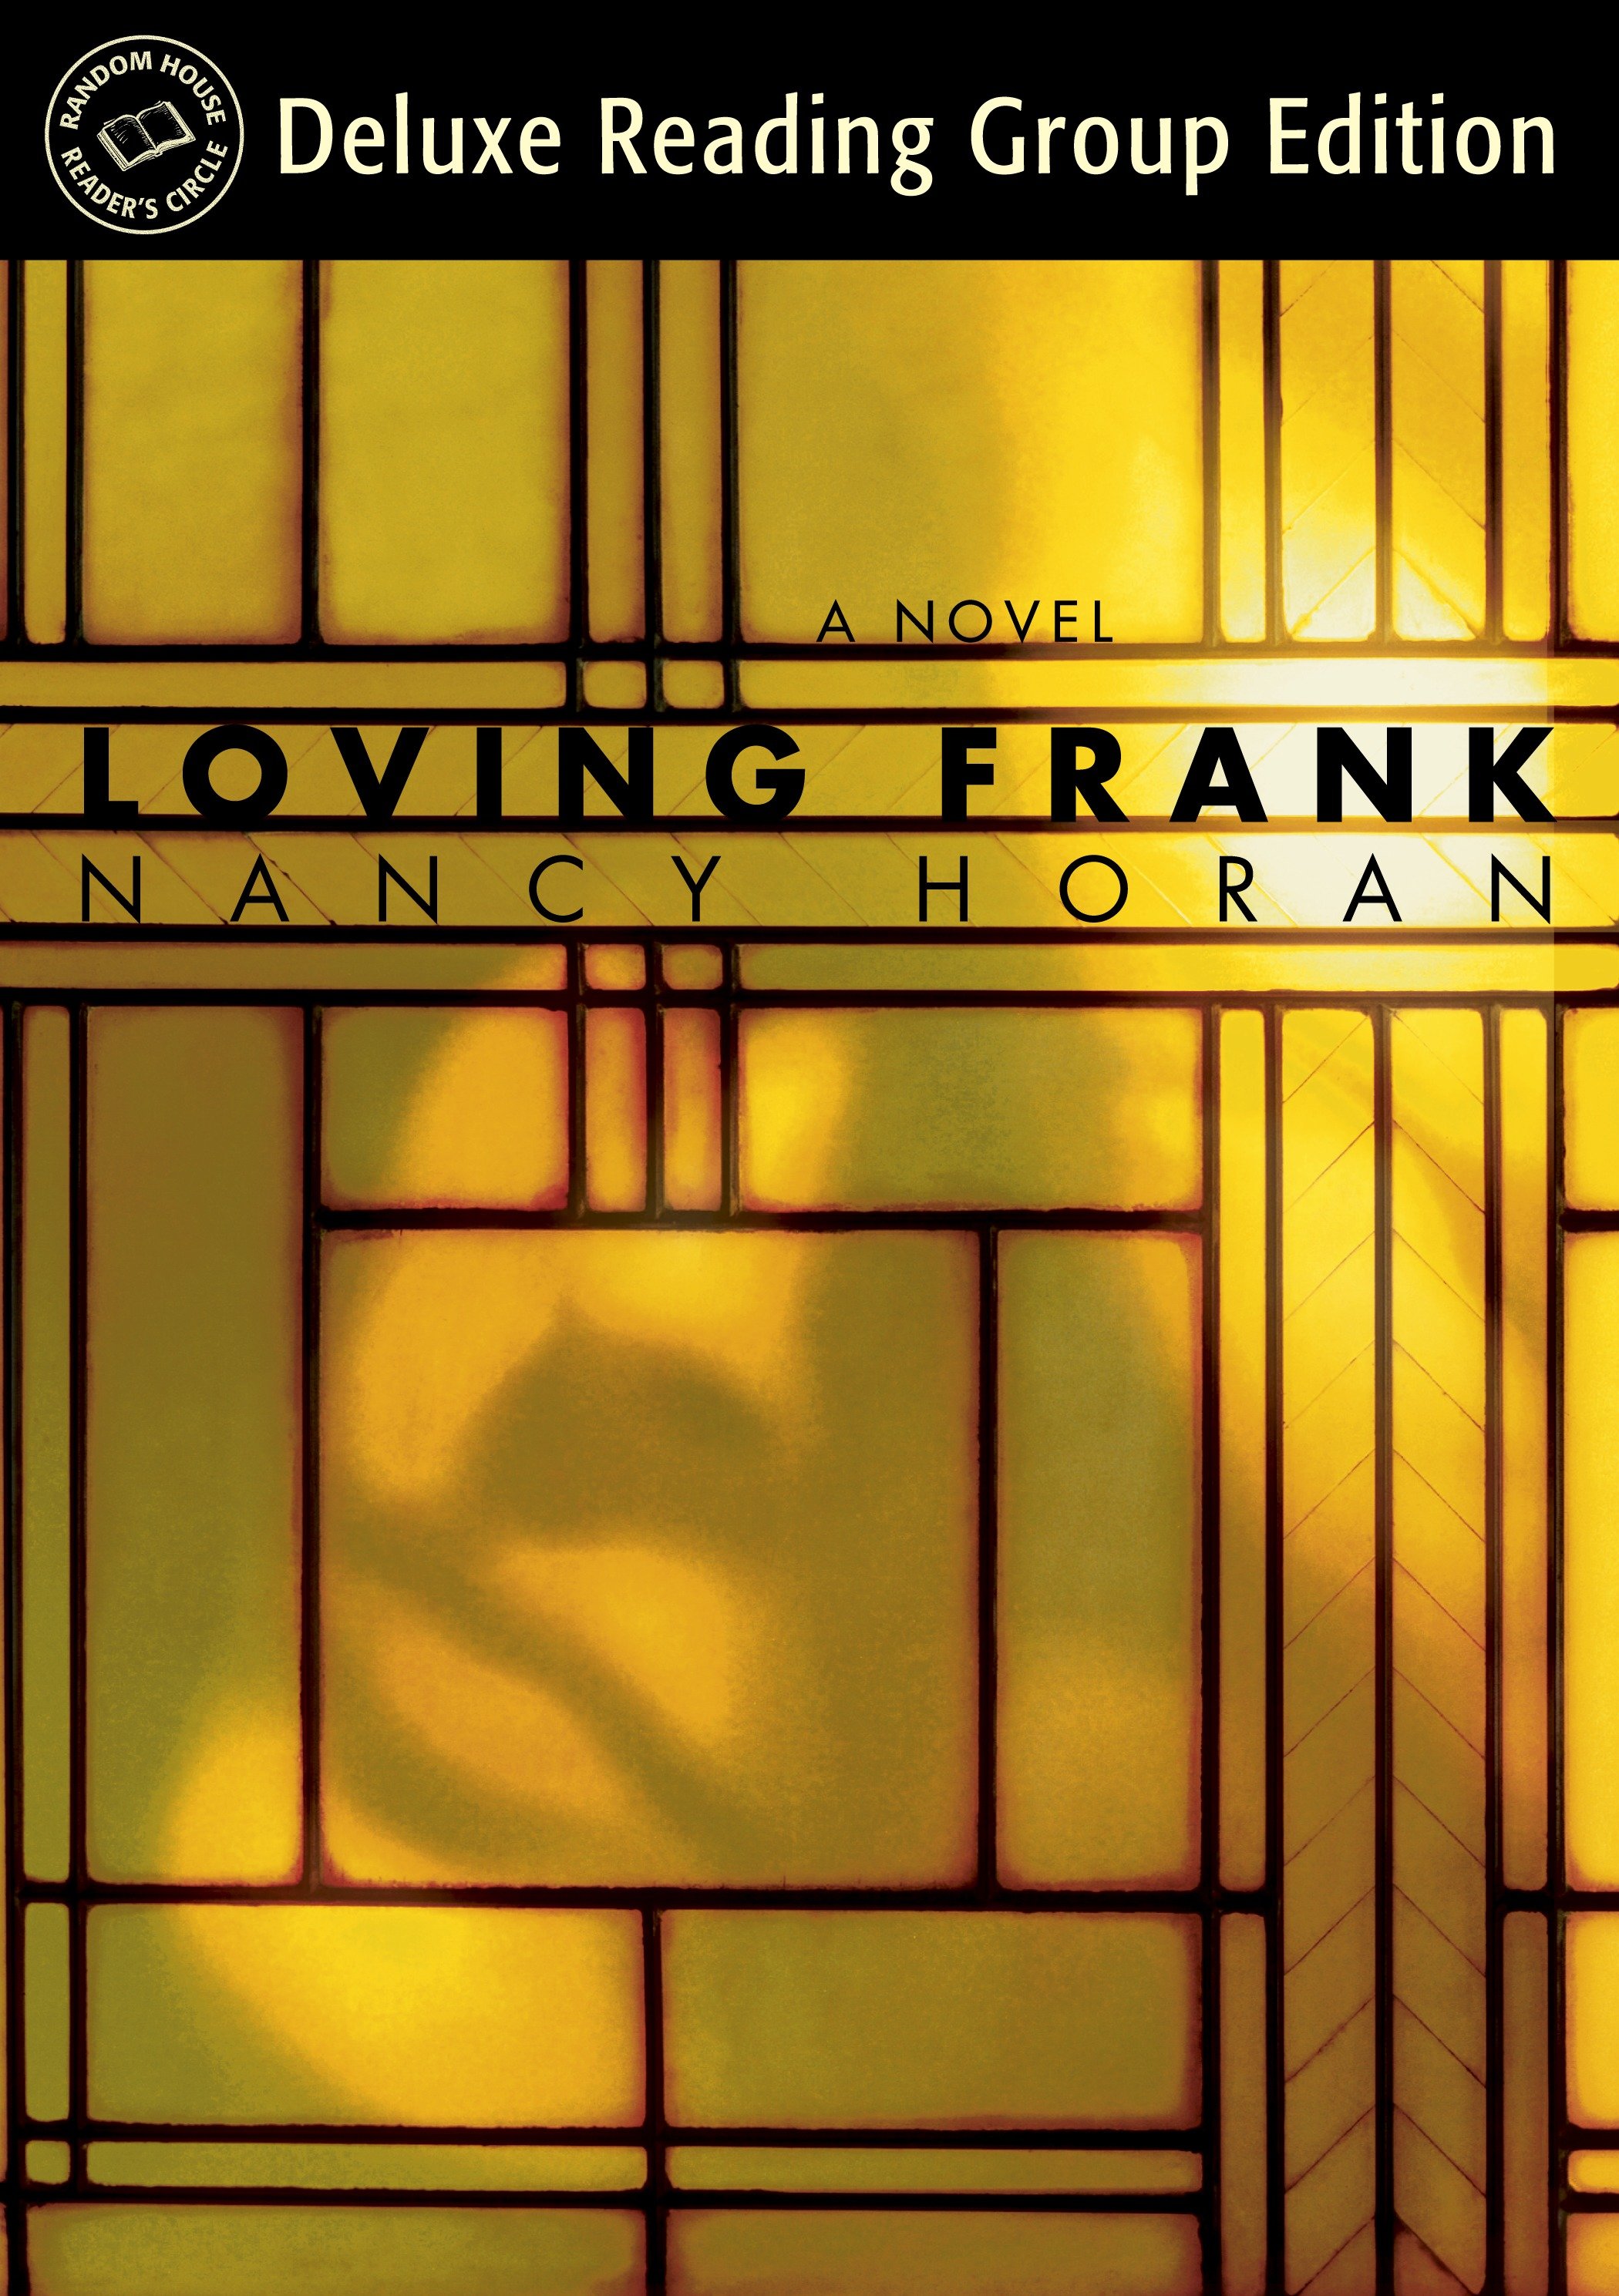 Loving Frank (Random House Reader's Circle Deluxe Reading Group Edition) cover image